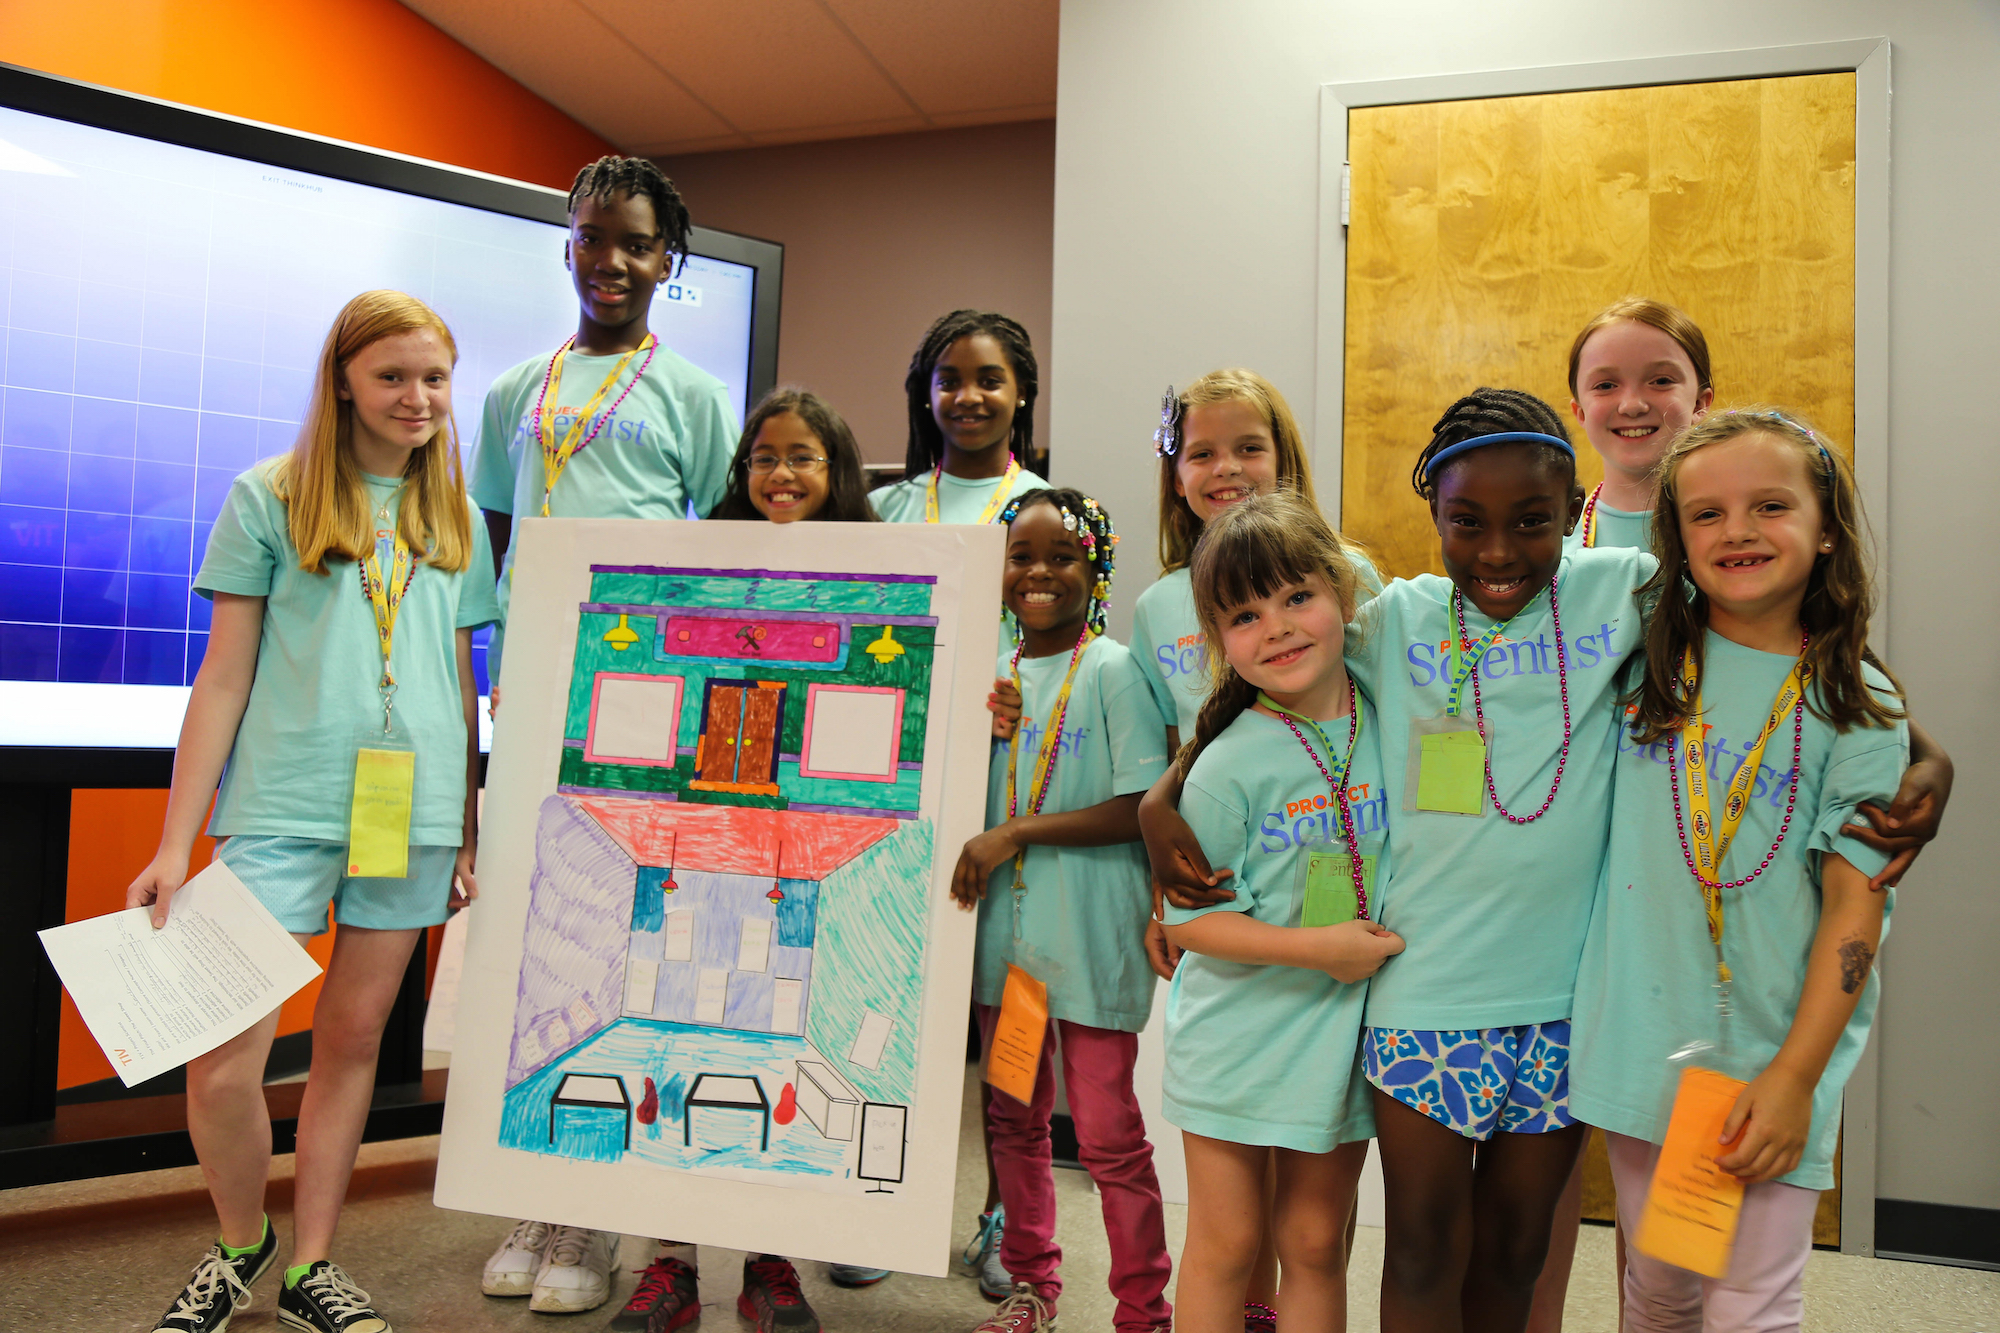 Project Scientist girls present their software and hardware concepts at T1V